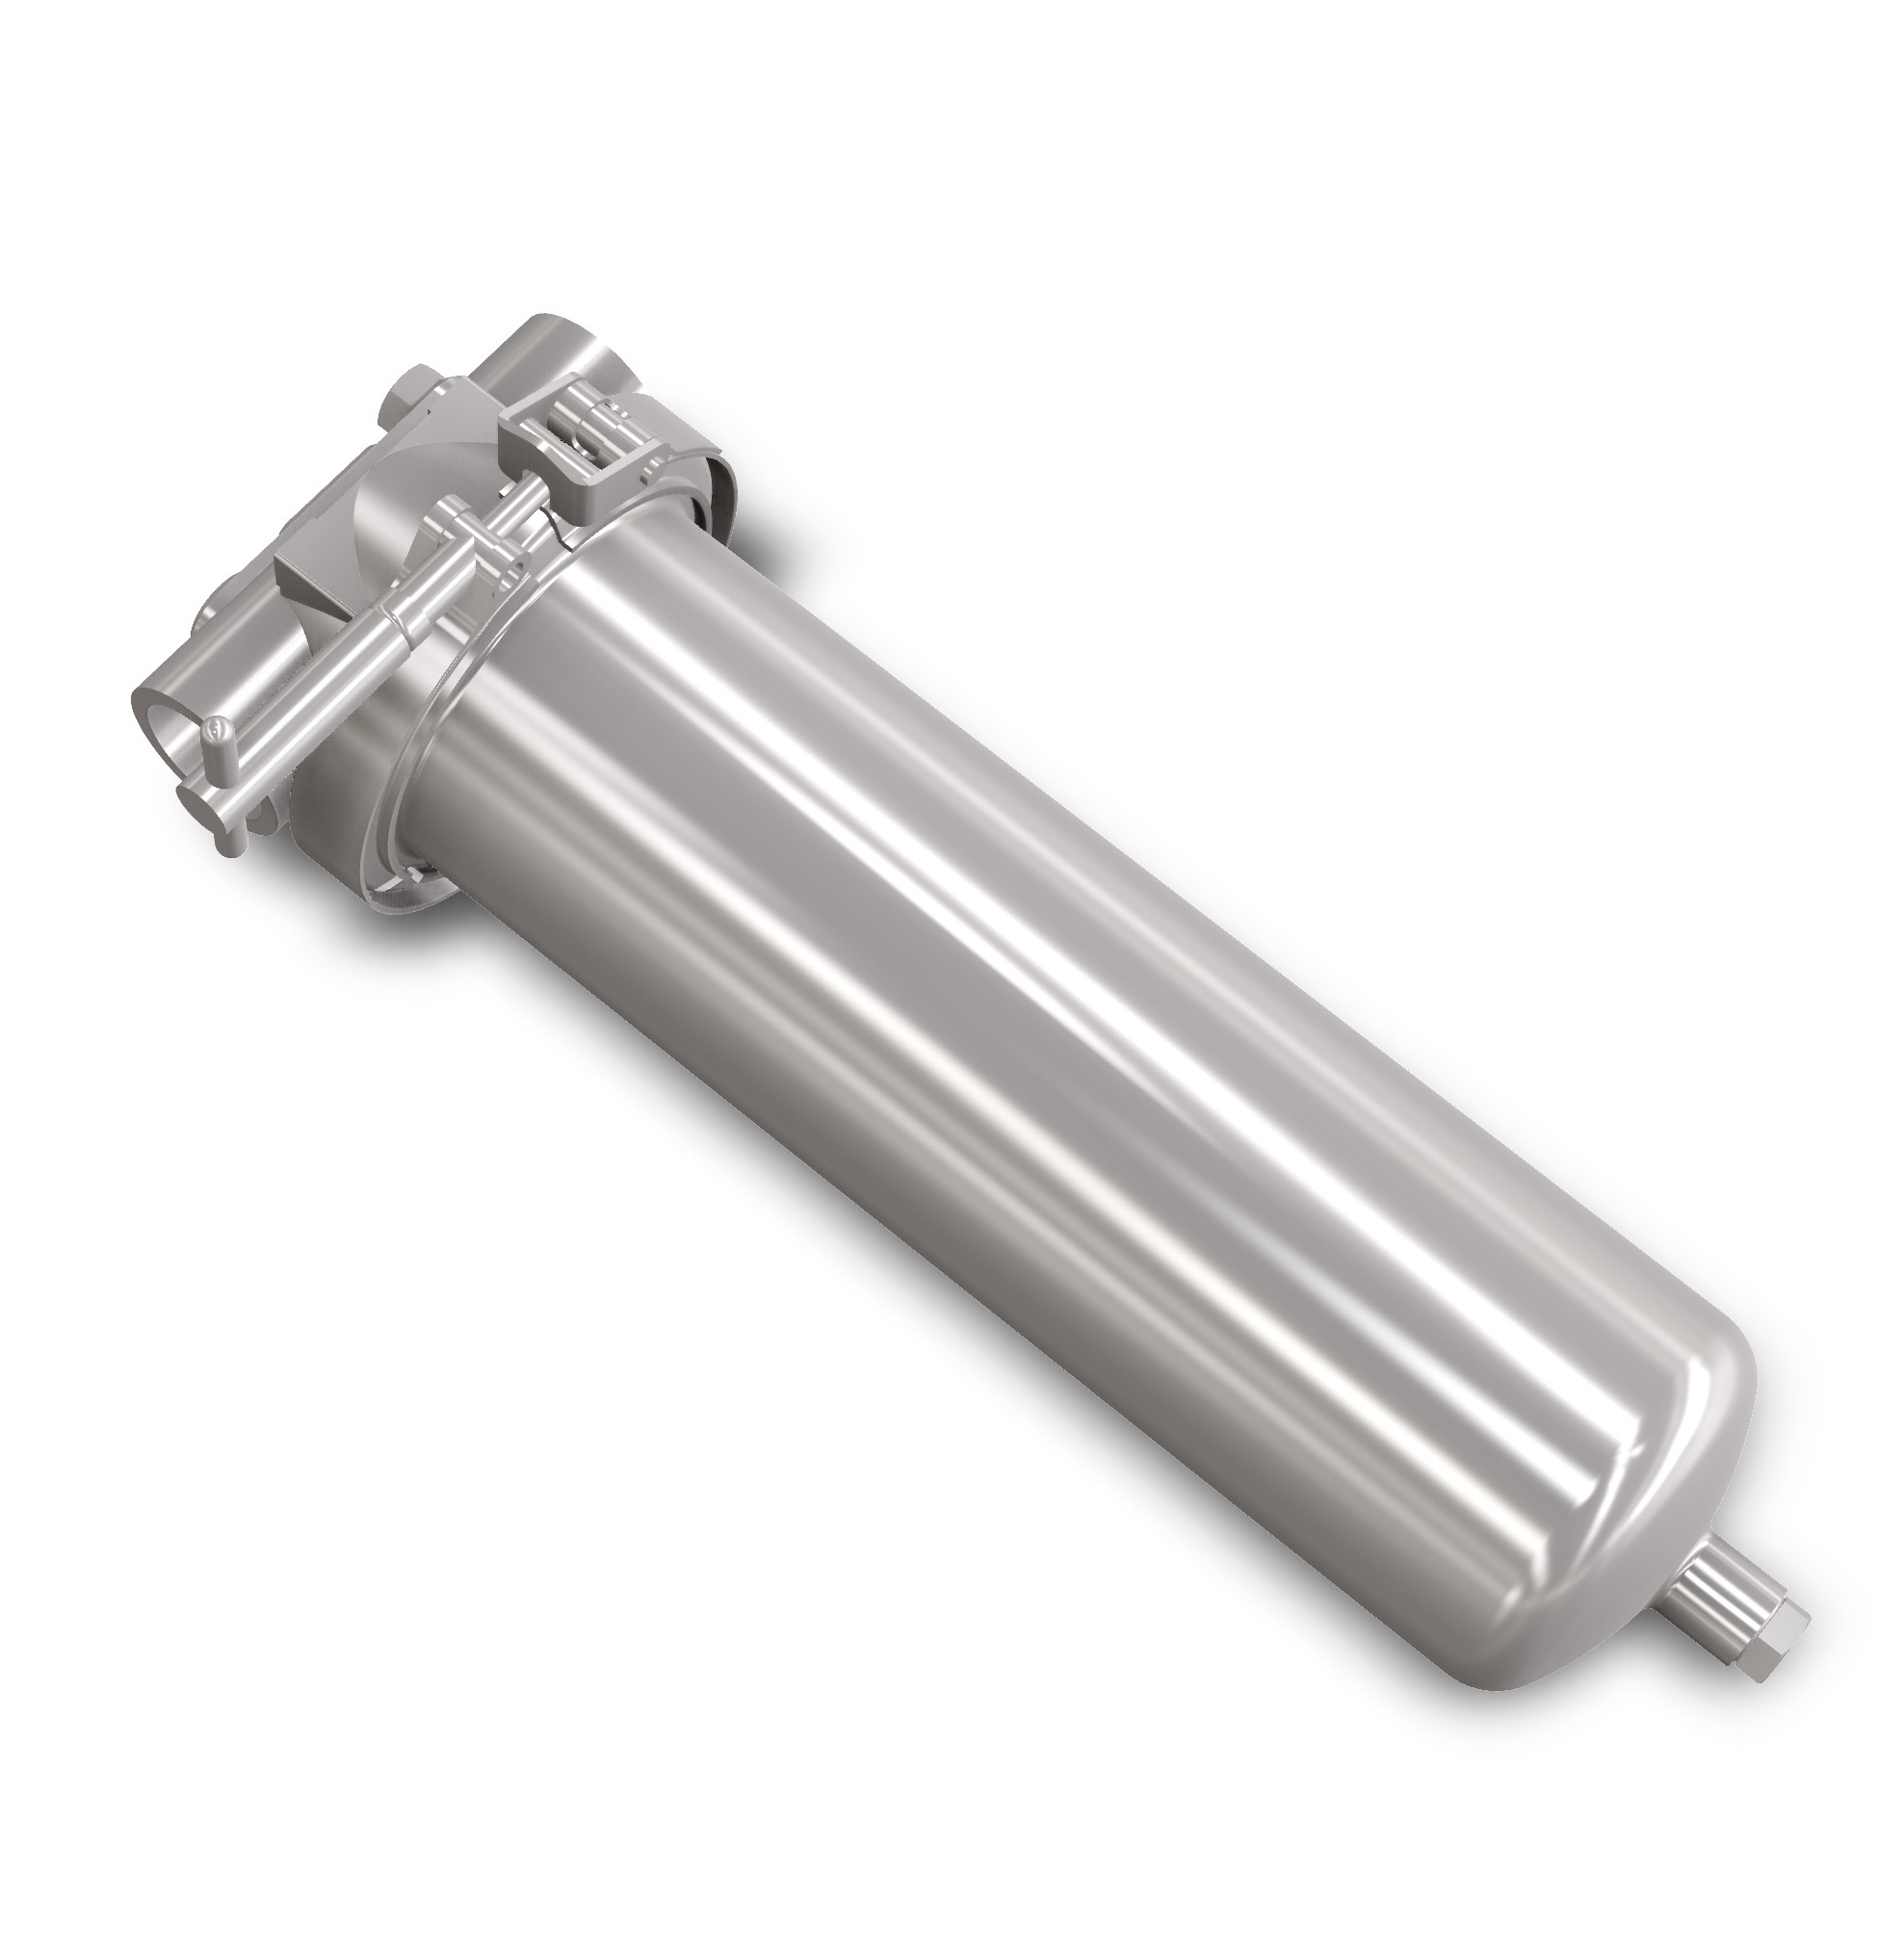 Inline particle filter for gas or liquid filtration